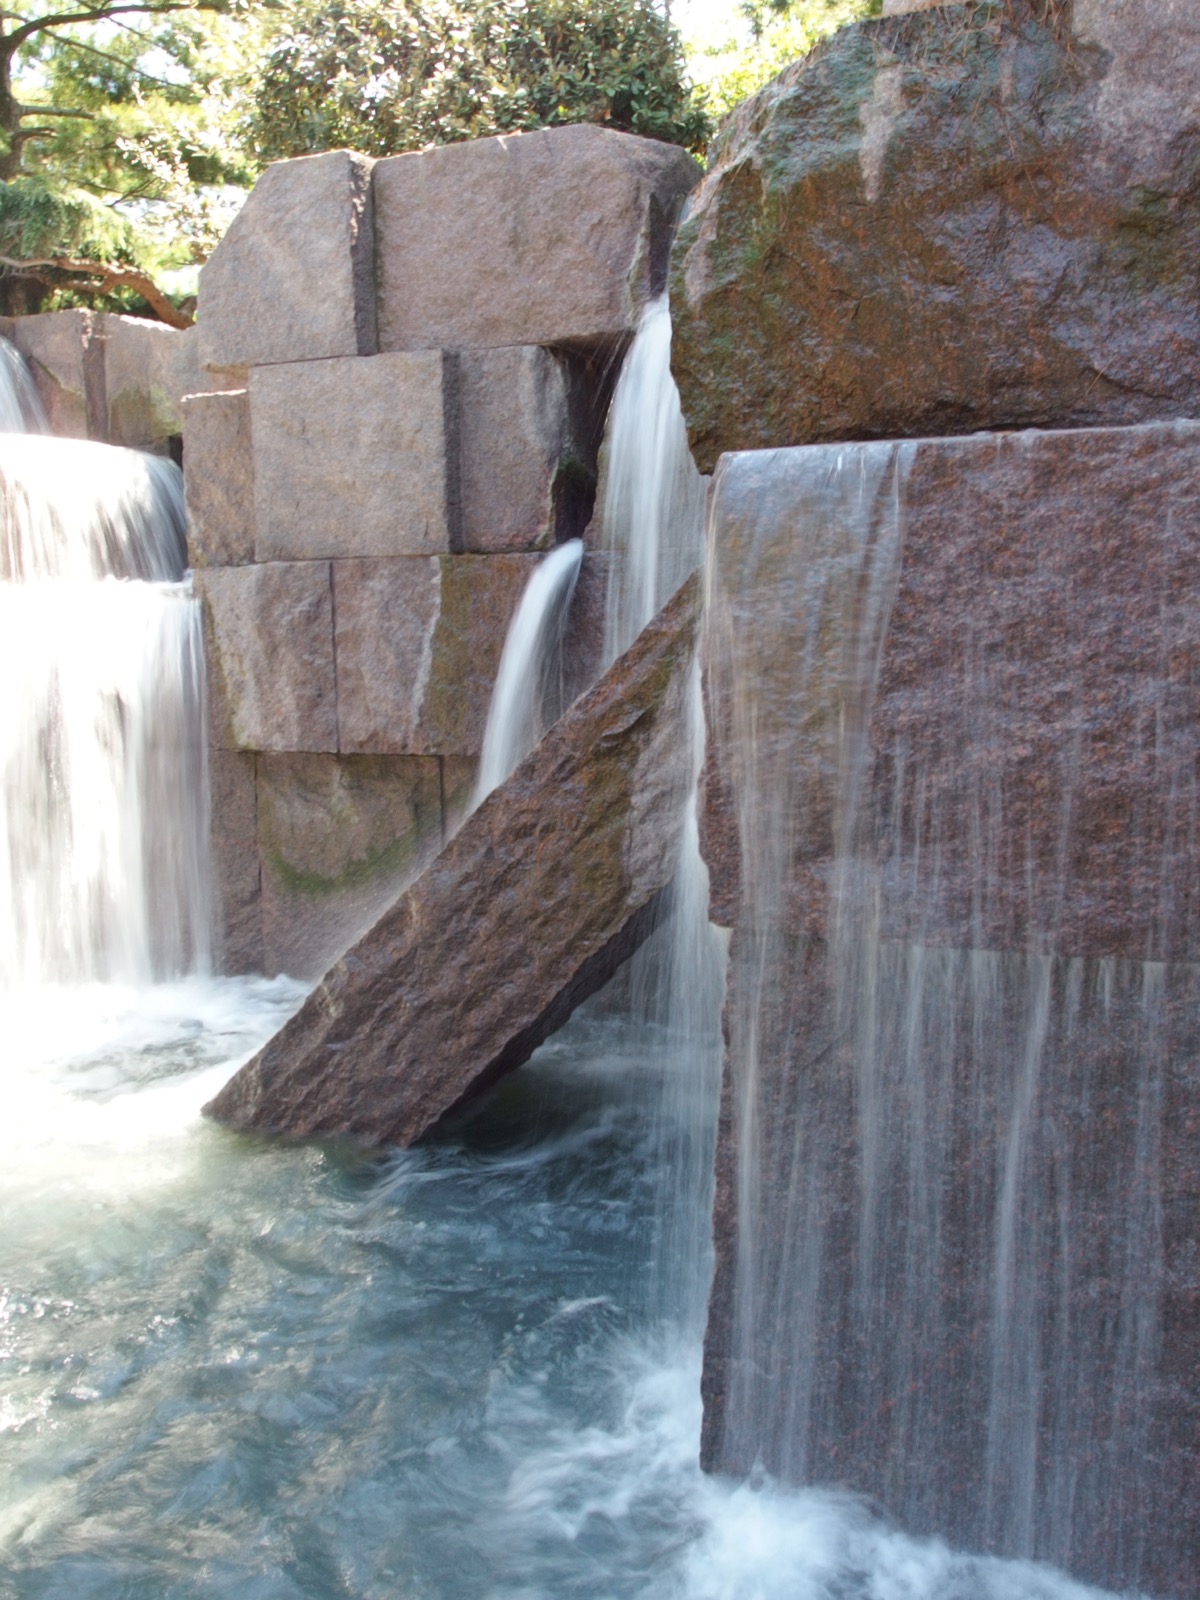 Long exposure image of a water feature at the FDR Memorial in Washington DC